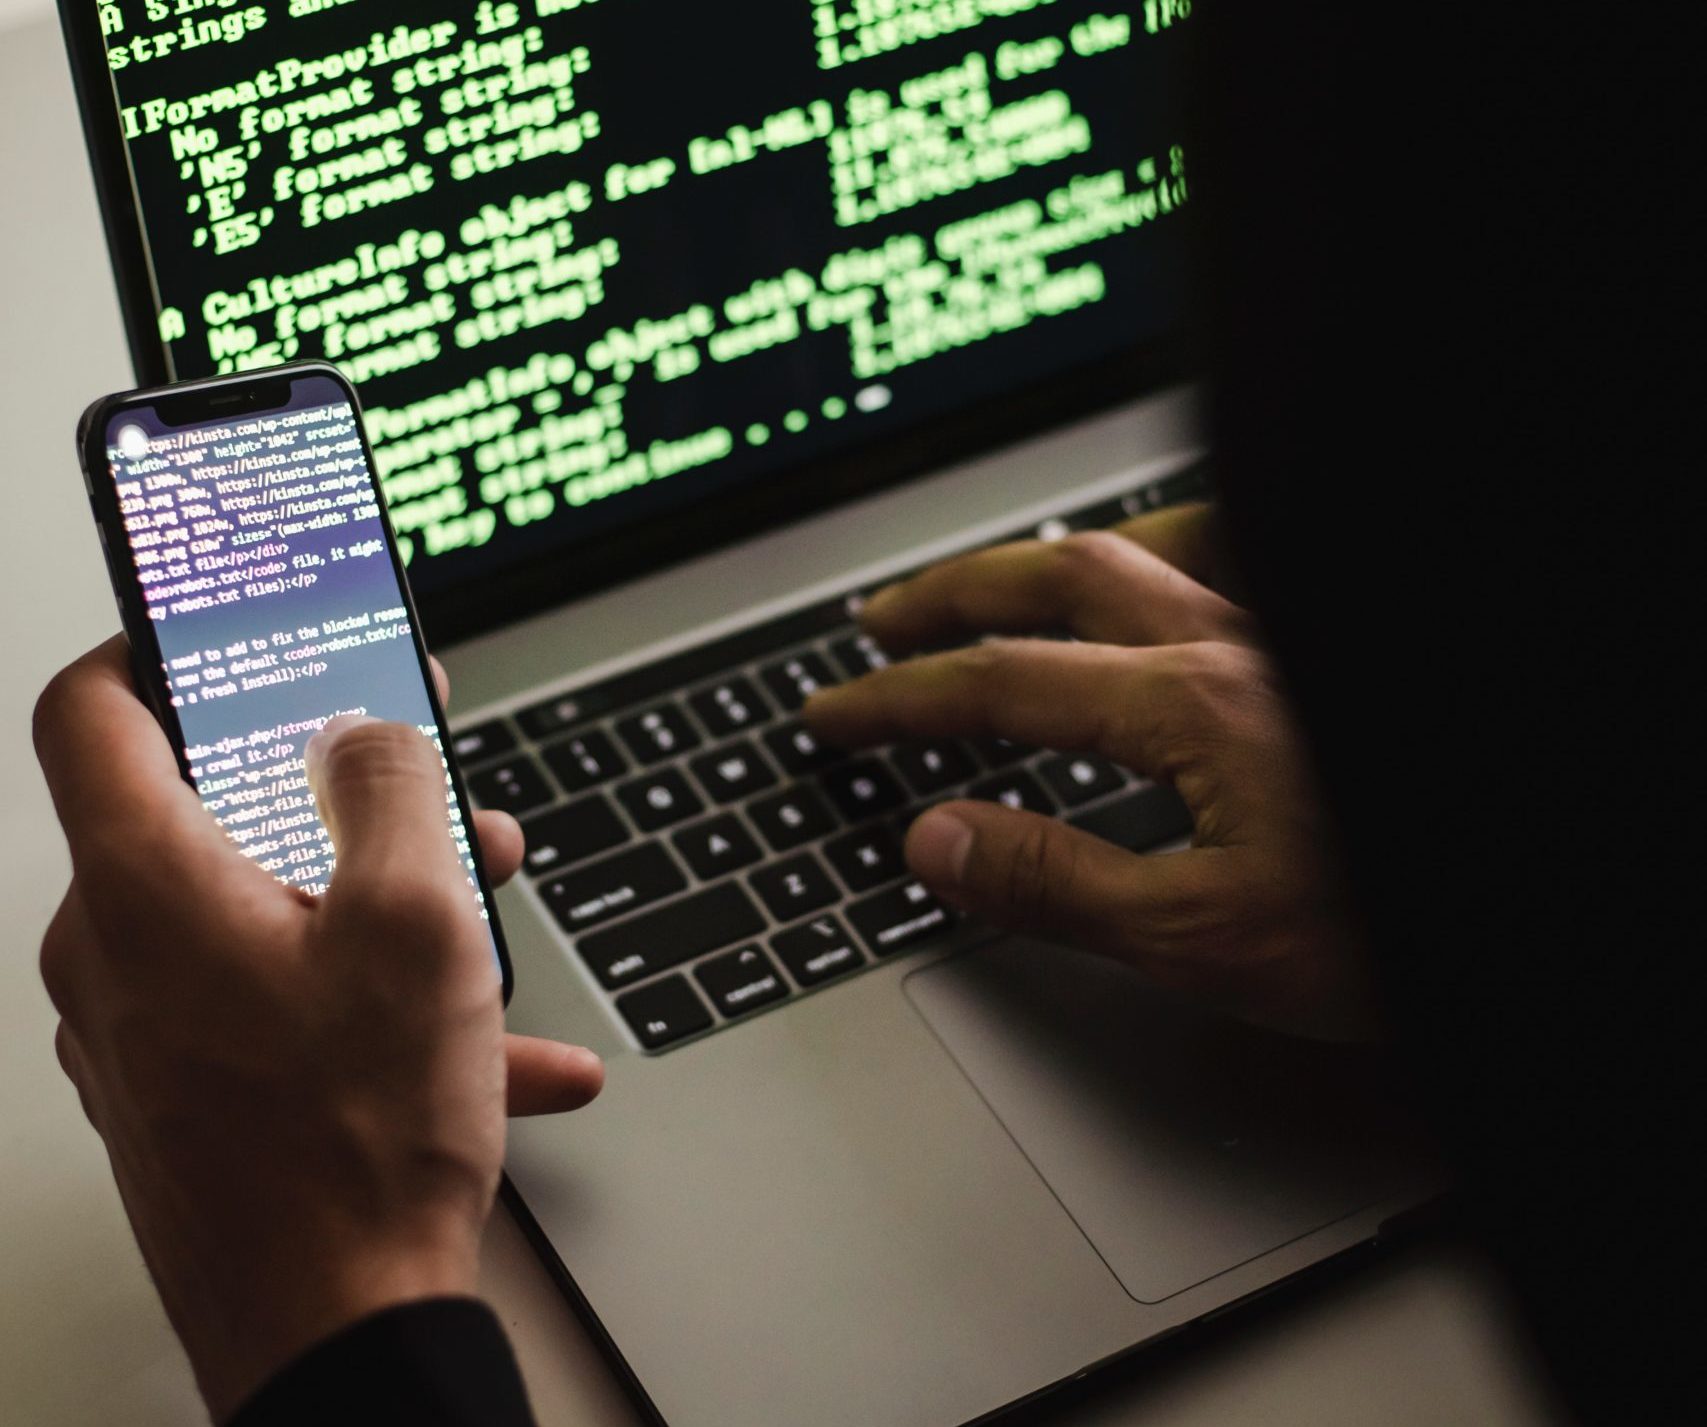 Somebody writing code on a laptop while looking at code on a phone. Photo by Sora Shimazaki from Pexels